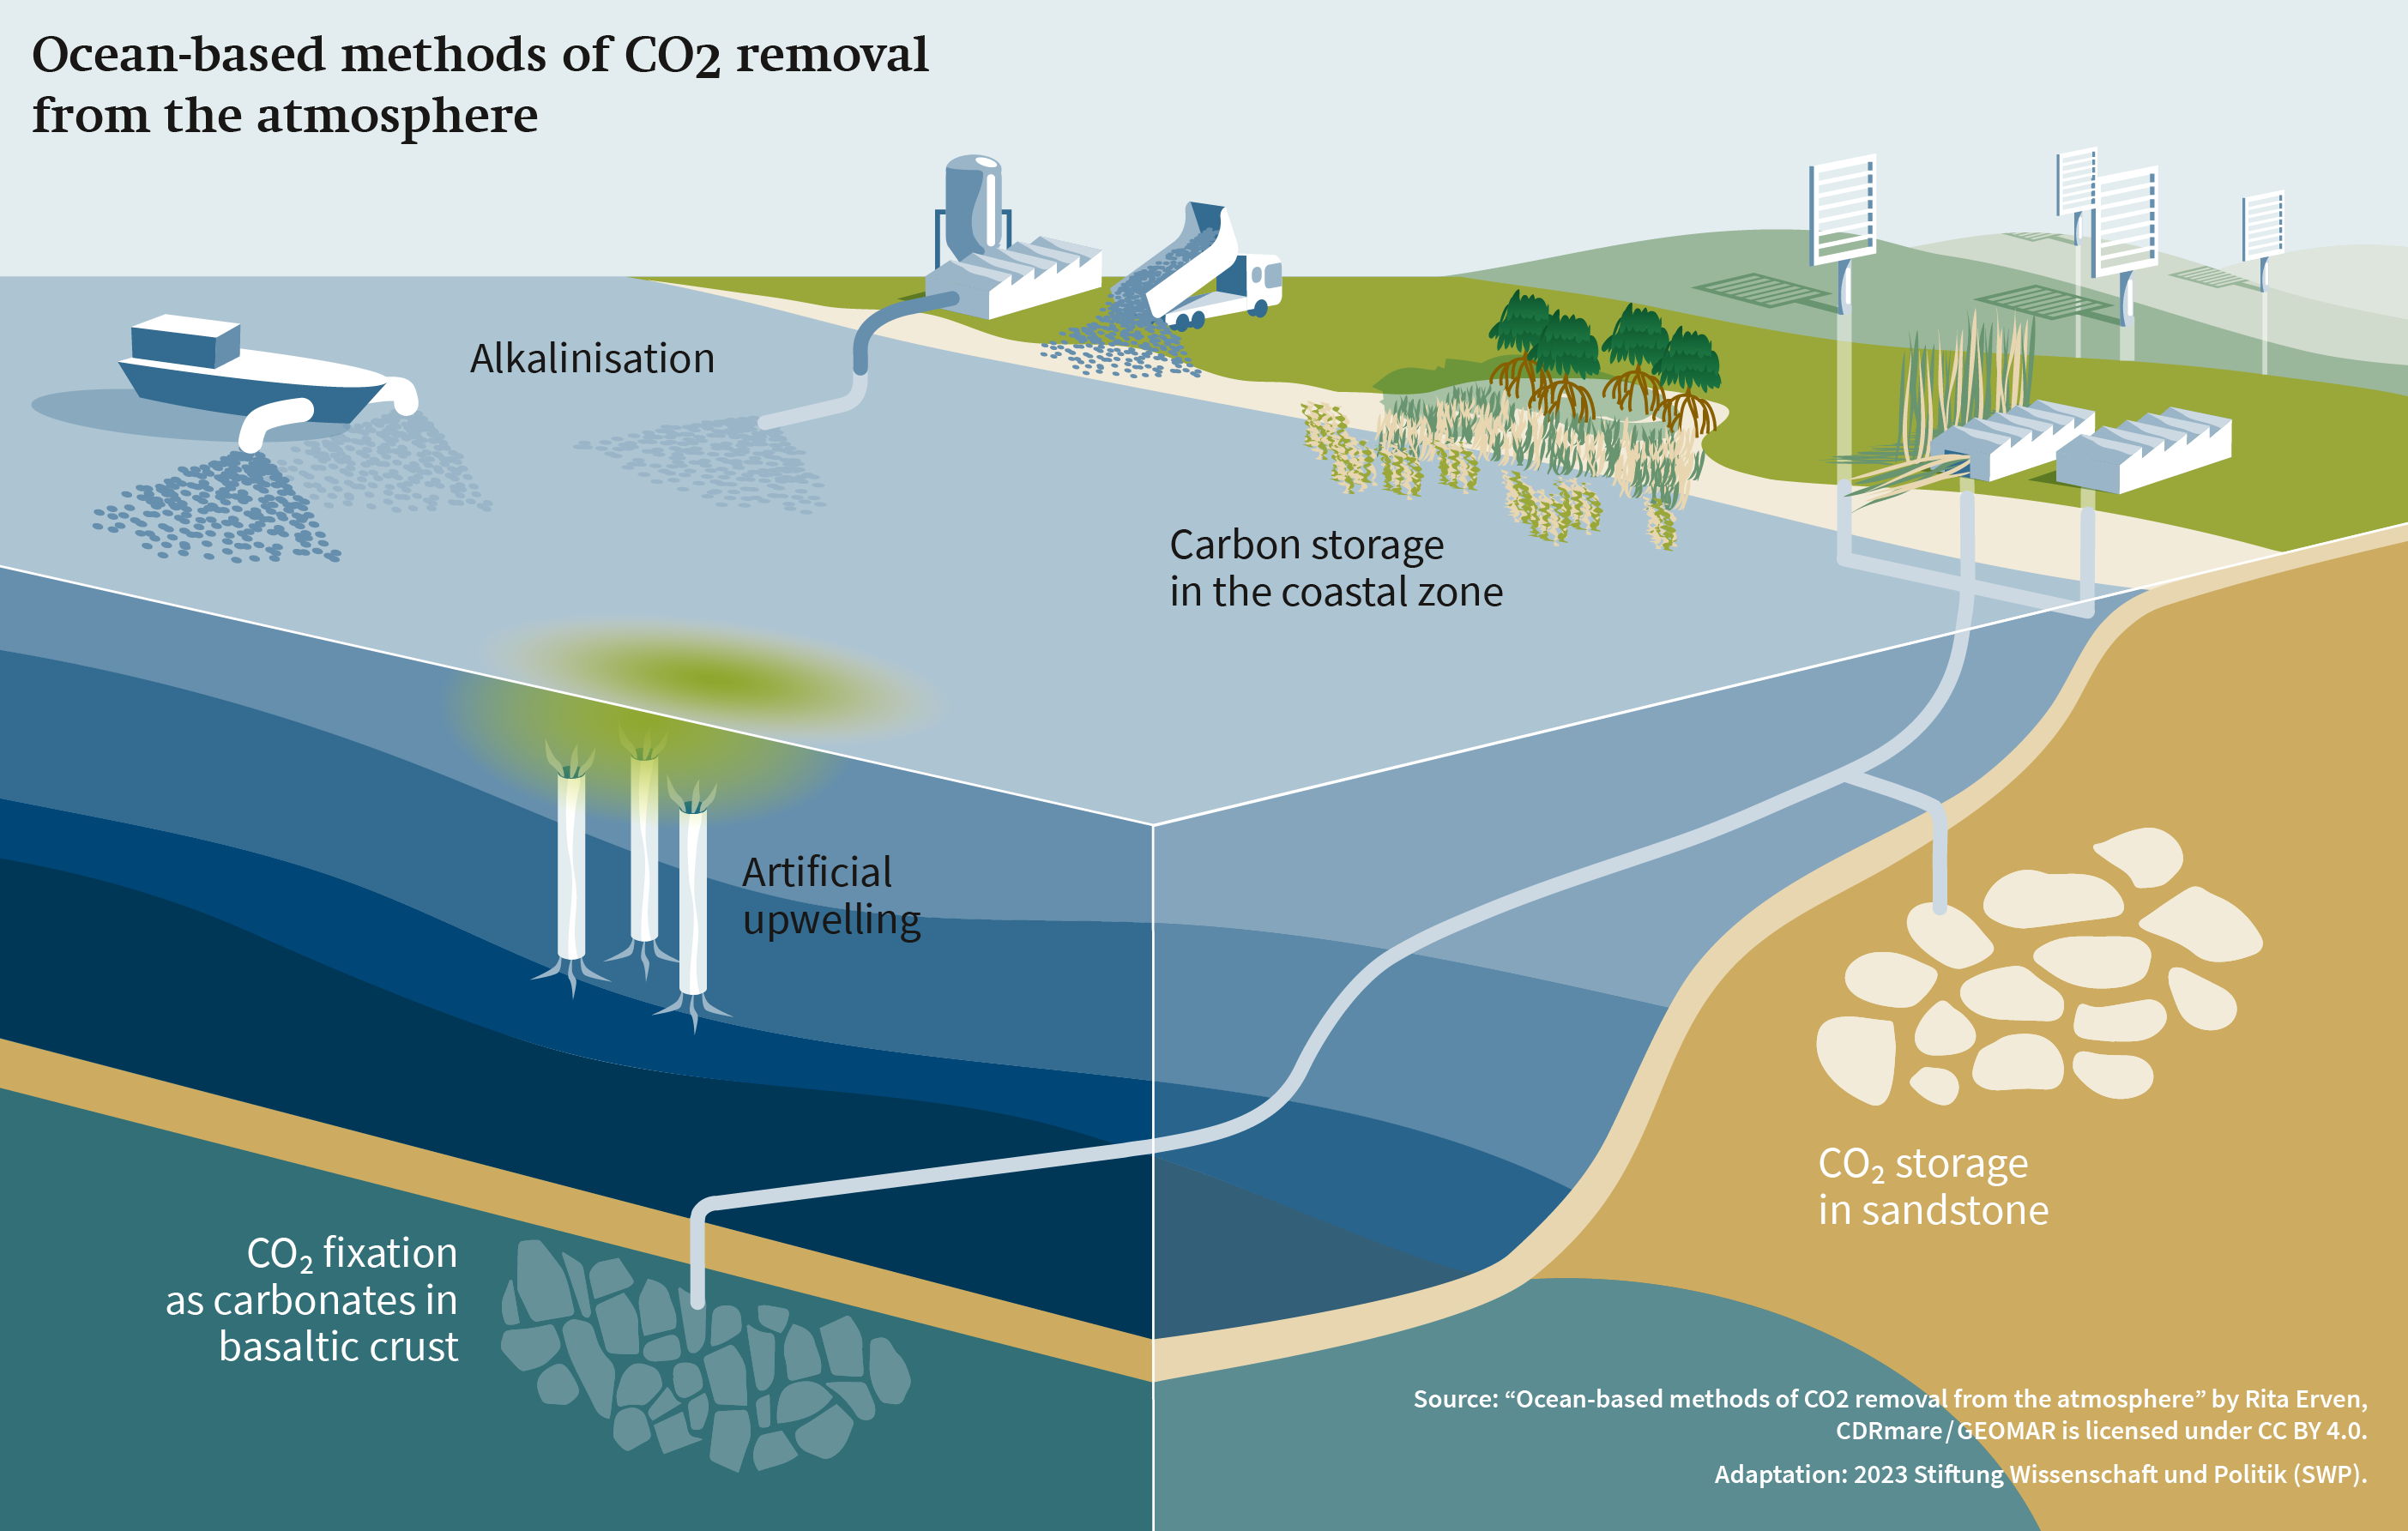 Figure 1: Ocean-based methods of CO2 removal from the atmosphere